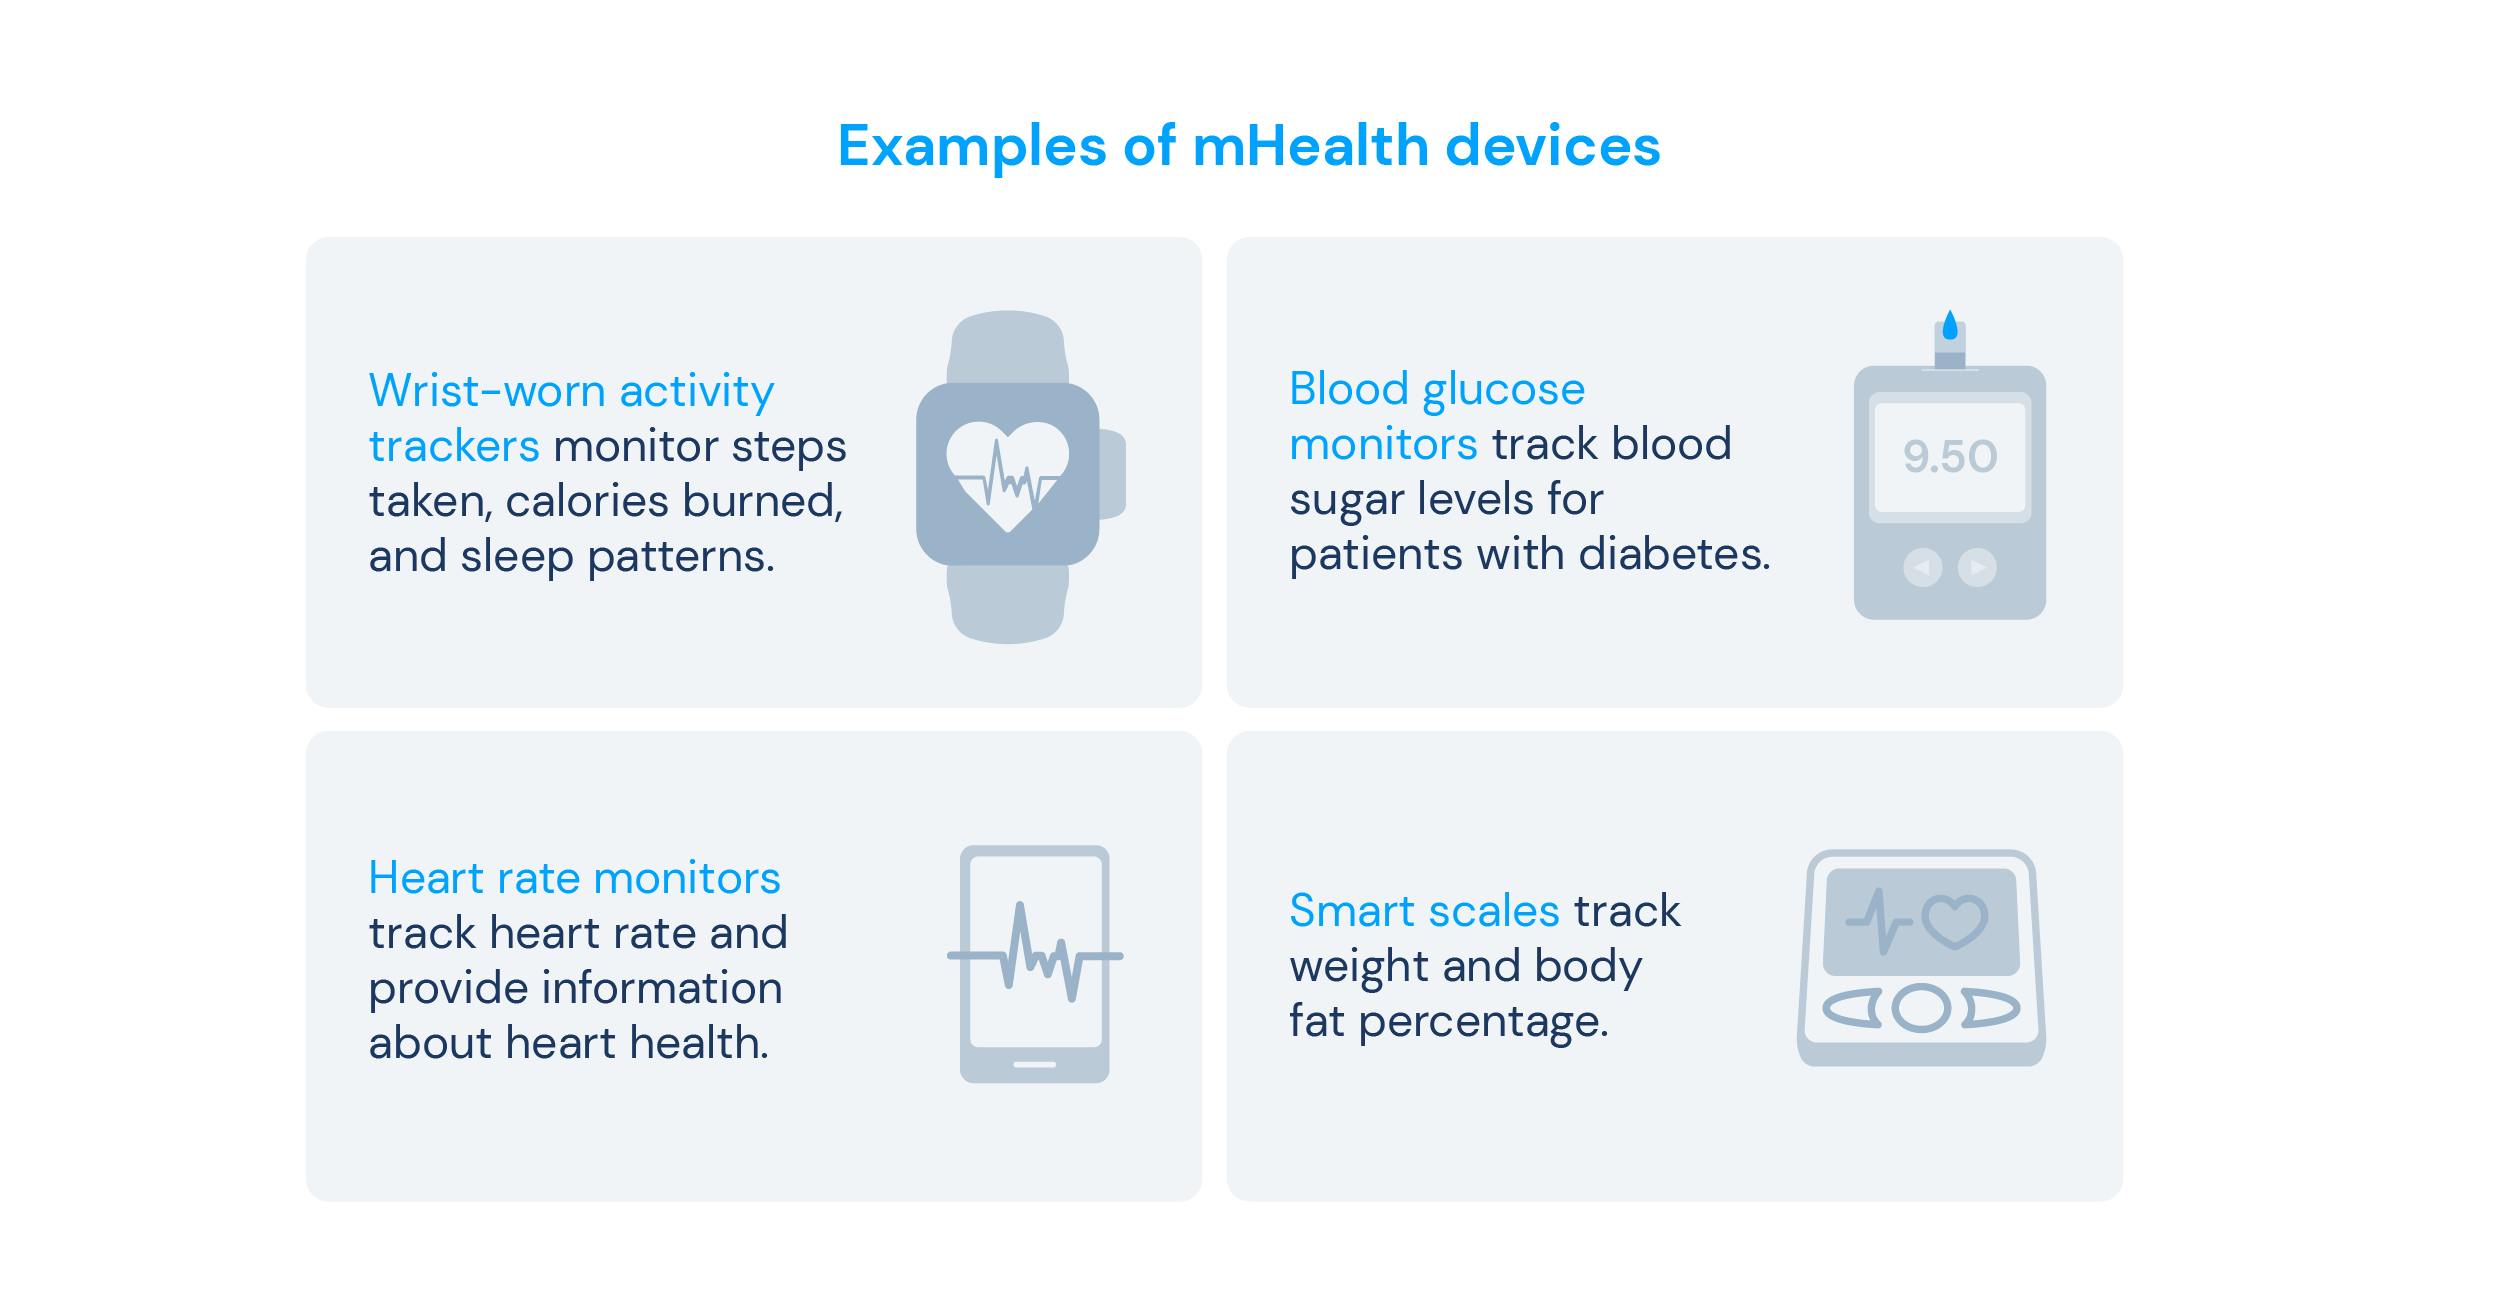 4 examples of mHealth devices